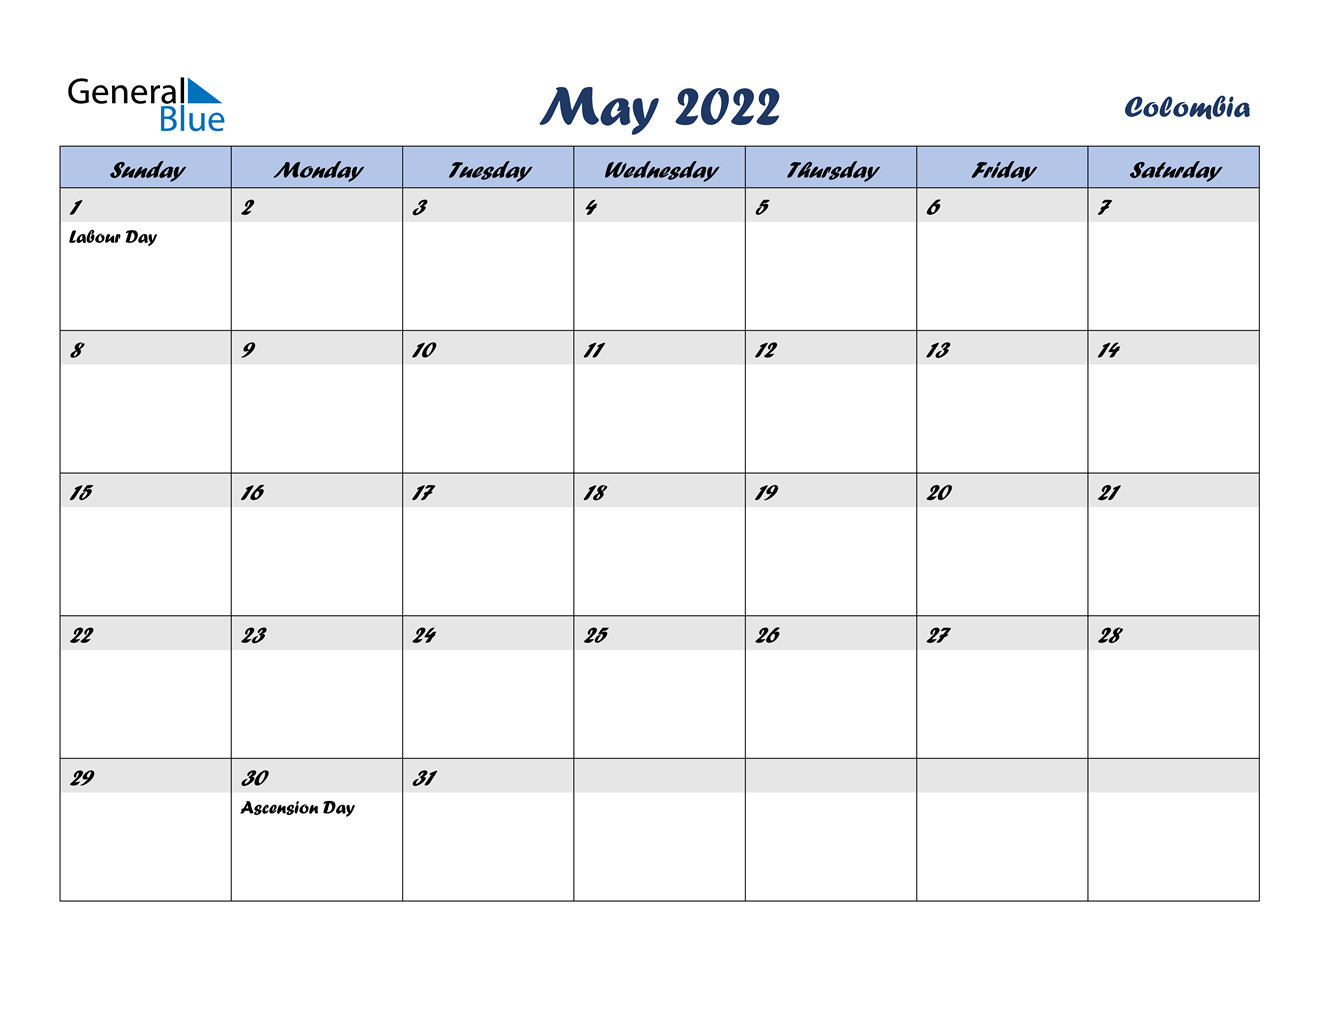 May 2022 Calendar - Colombia